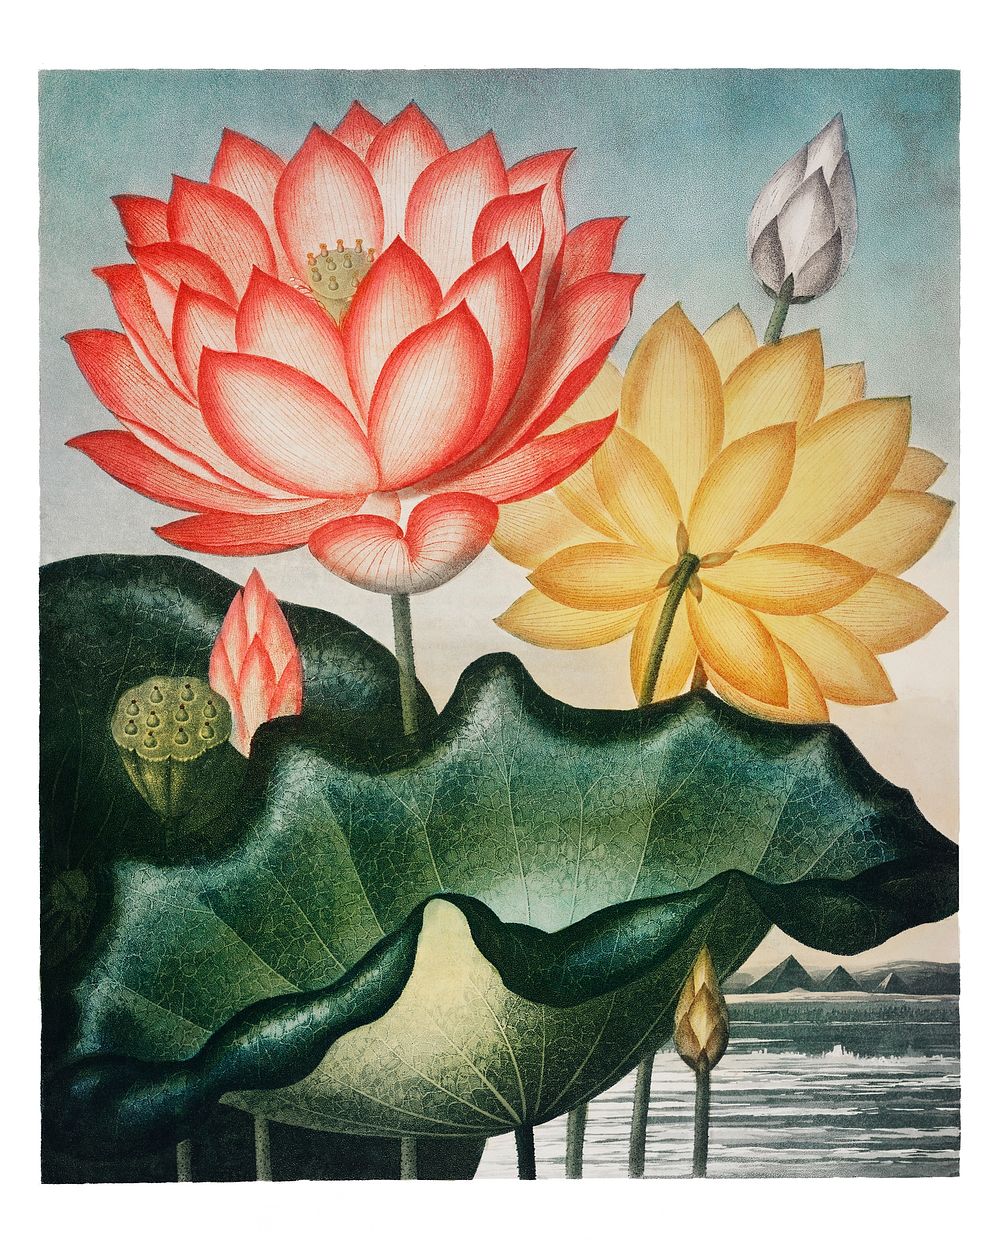 Water lilies vintage illustration wall art print and poster design remix from the original artwork.